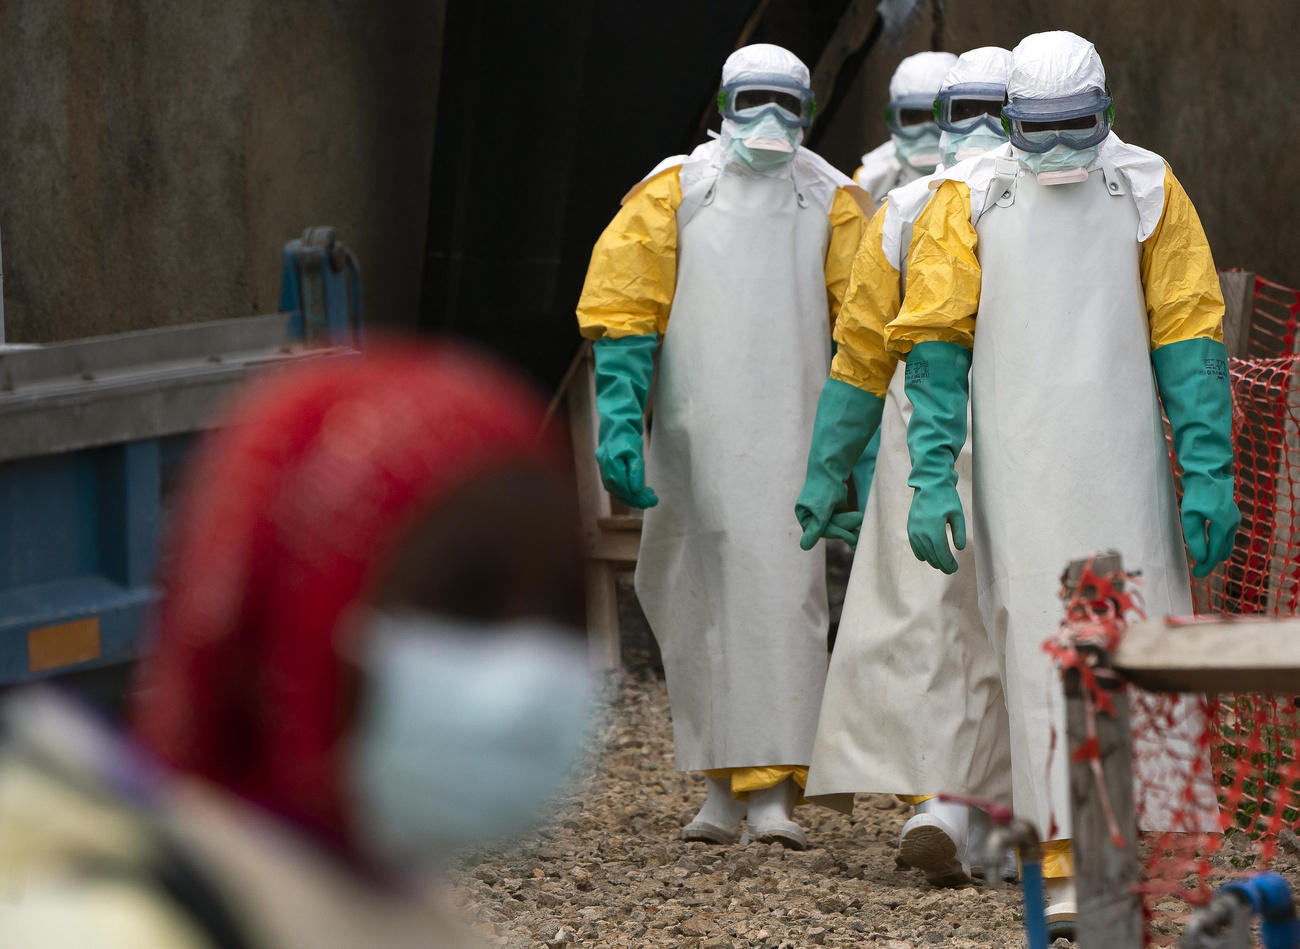 Health workers dressed in protective gear begin their shift at an Ebola treatment centre in Beni, DRC